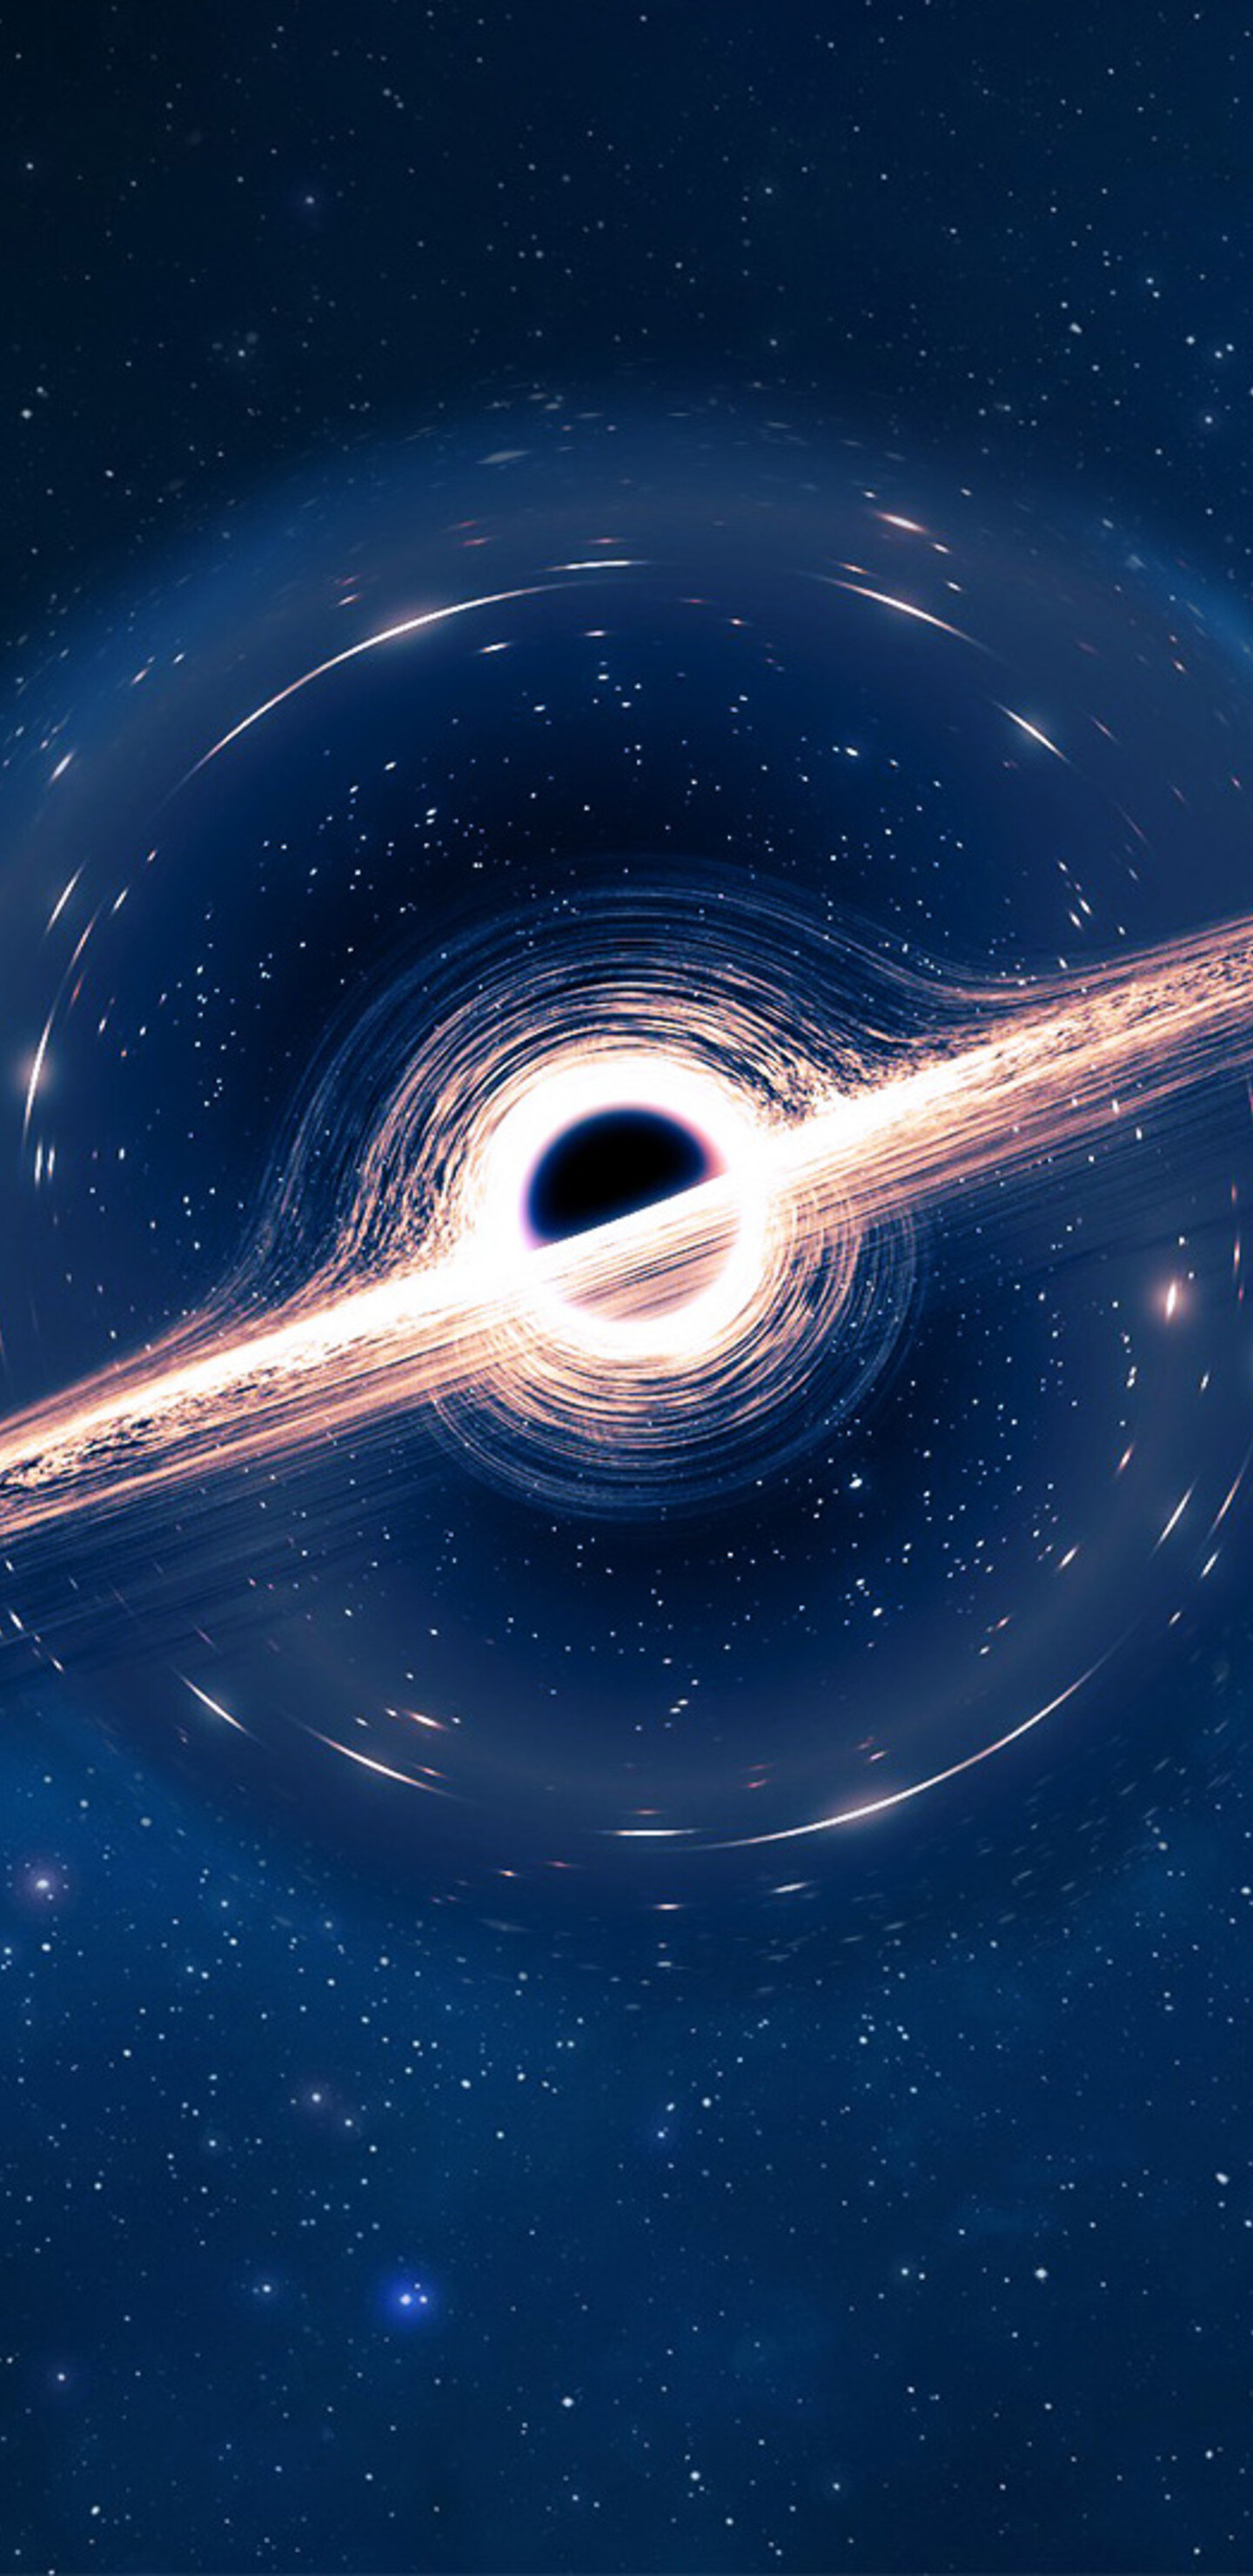 Black Hole: A region of space with an intense gravitational field, Stars. 1440x2960 HD Wallpaper.